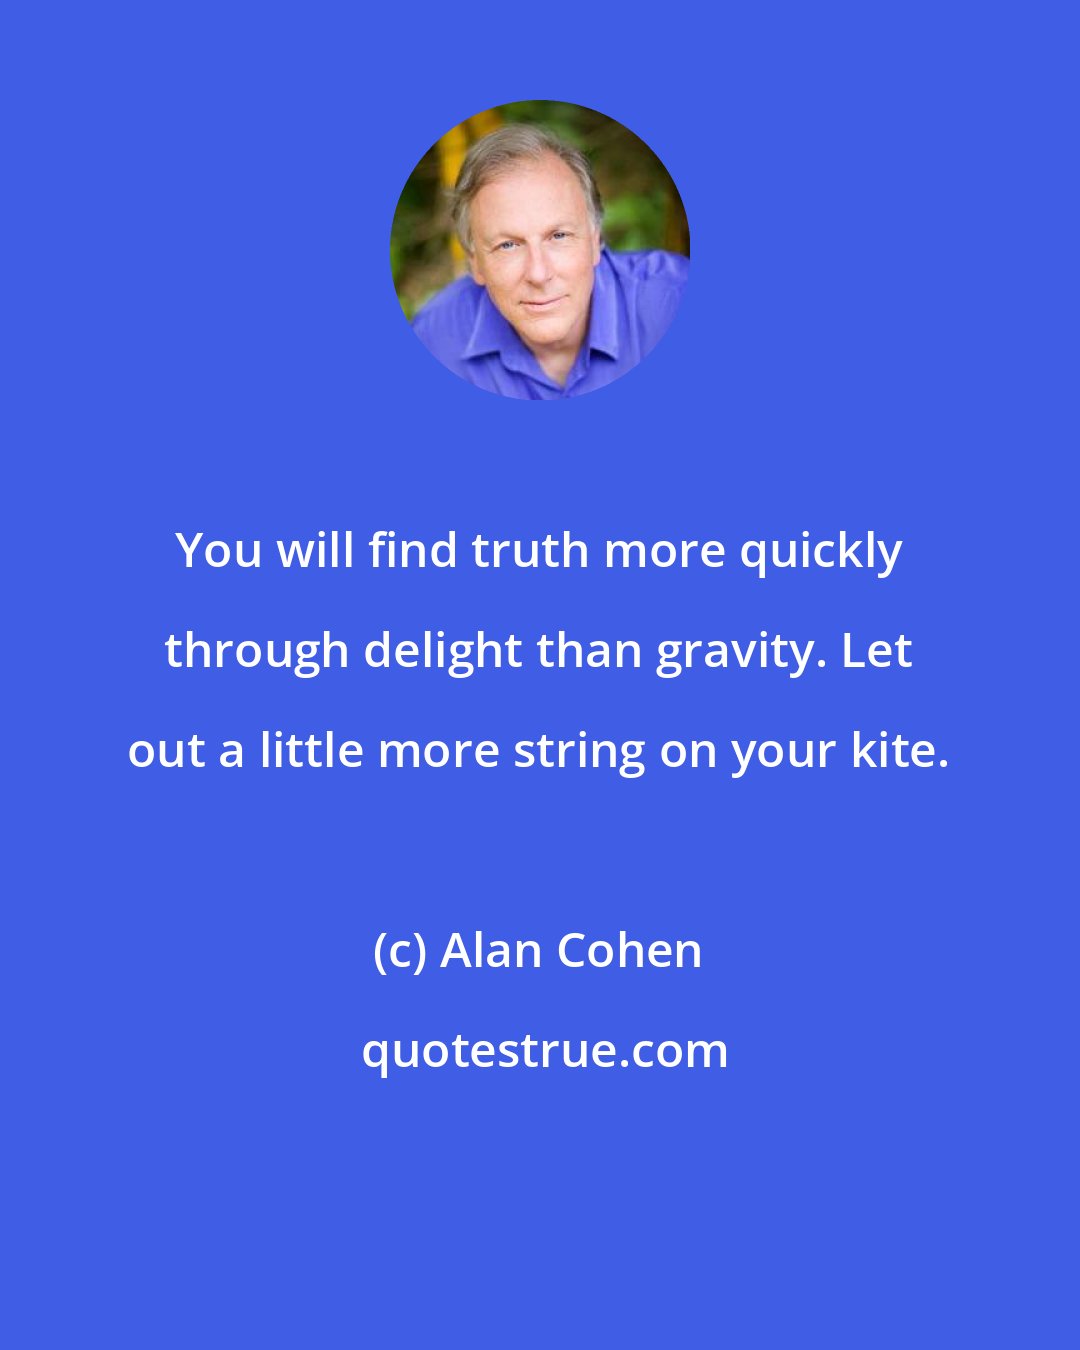 Alan Cohen: You will find truth more quickly through delight than gravity. Let out a little more string on your kite.